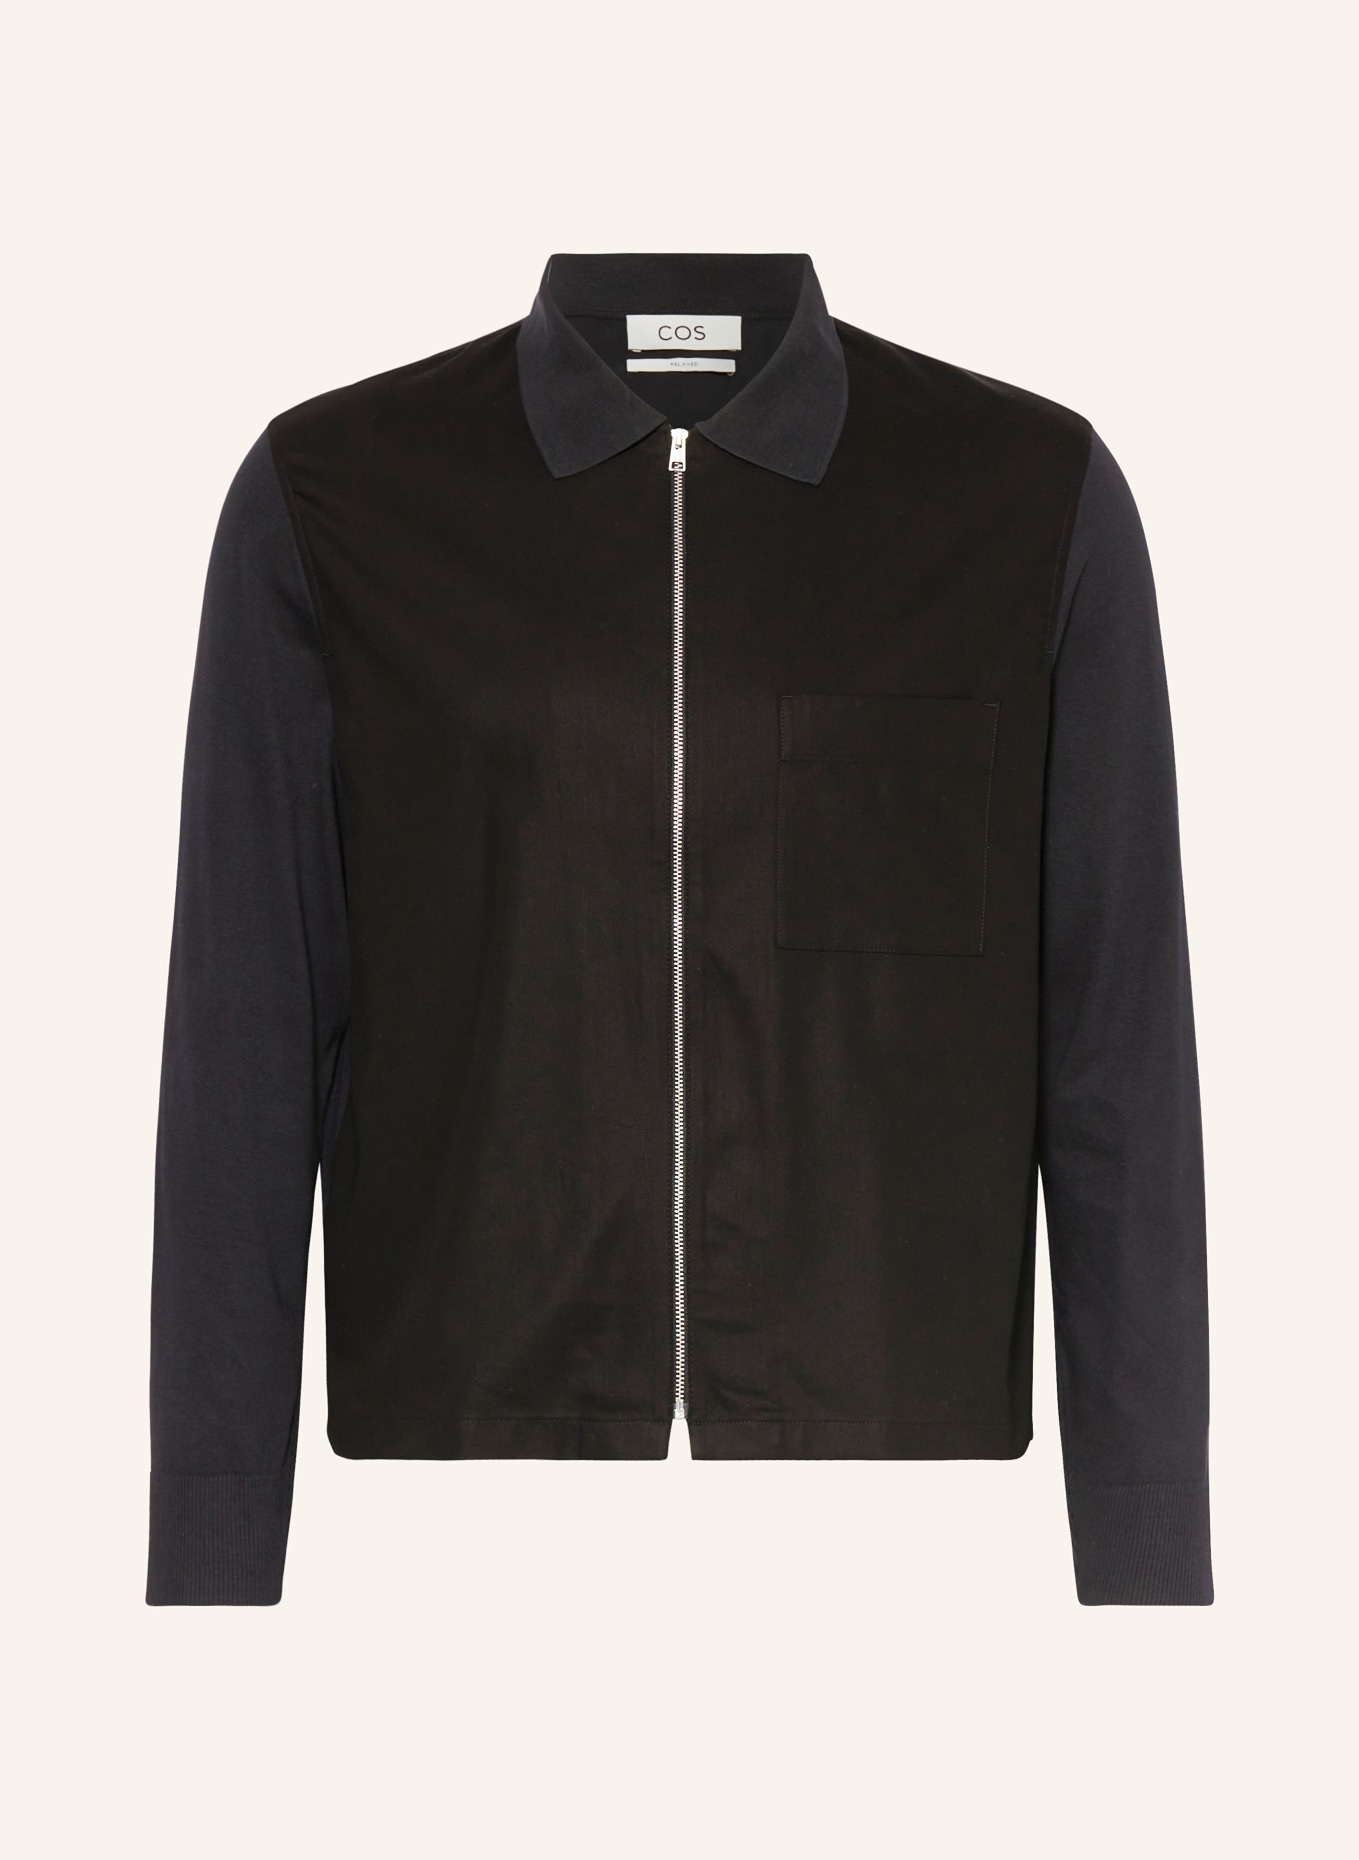 COS Overshirt in mixed materials, Color: BLACK/ DARK BLUE (Image 1)